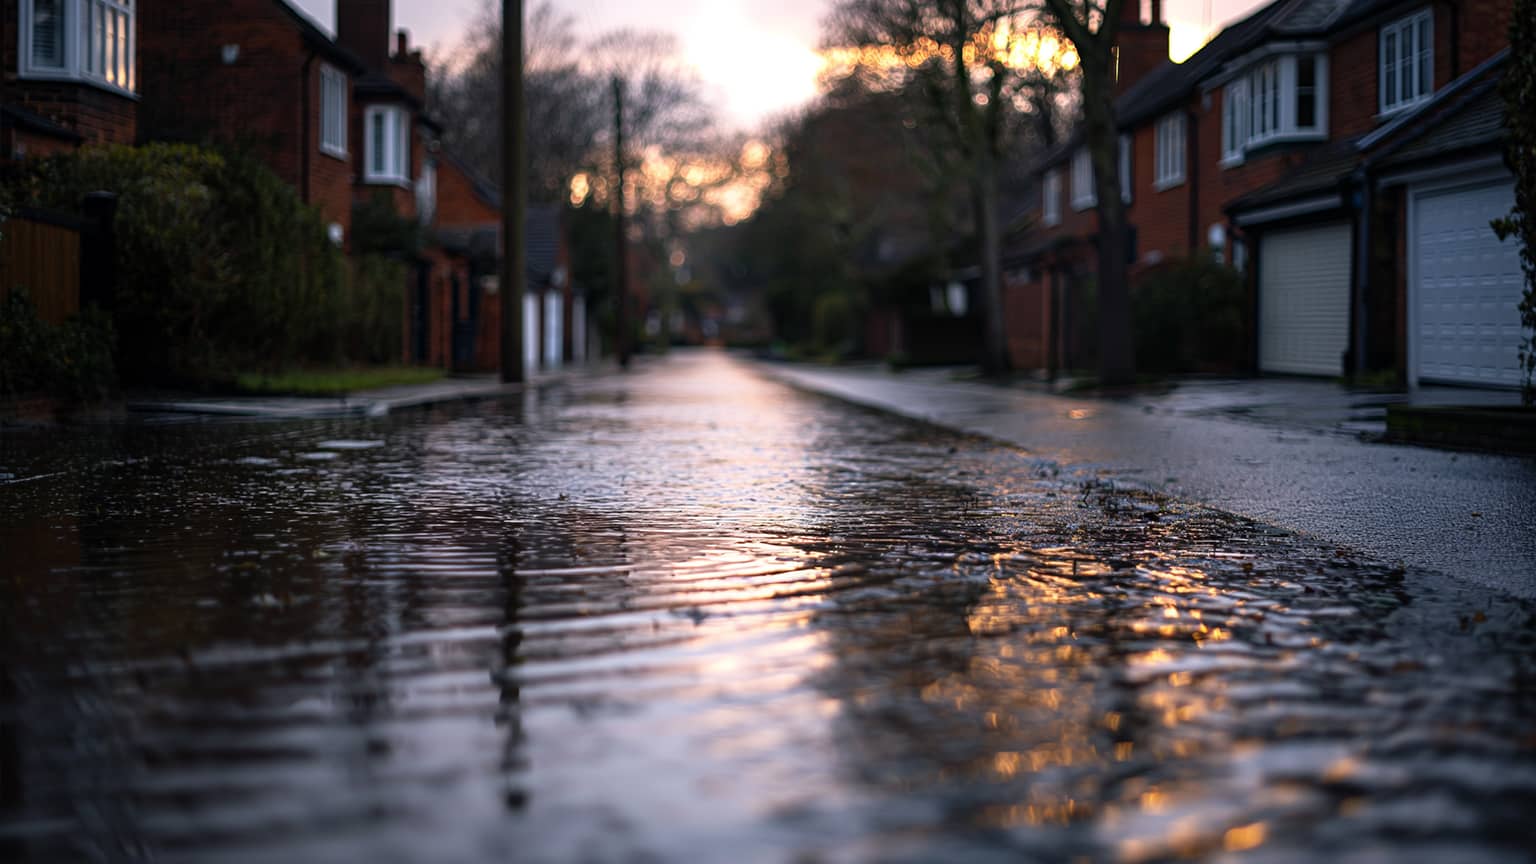 Flooded manhole on street with visible water overflow